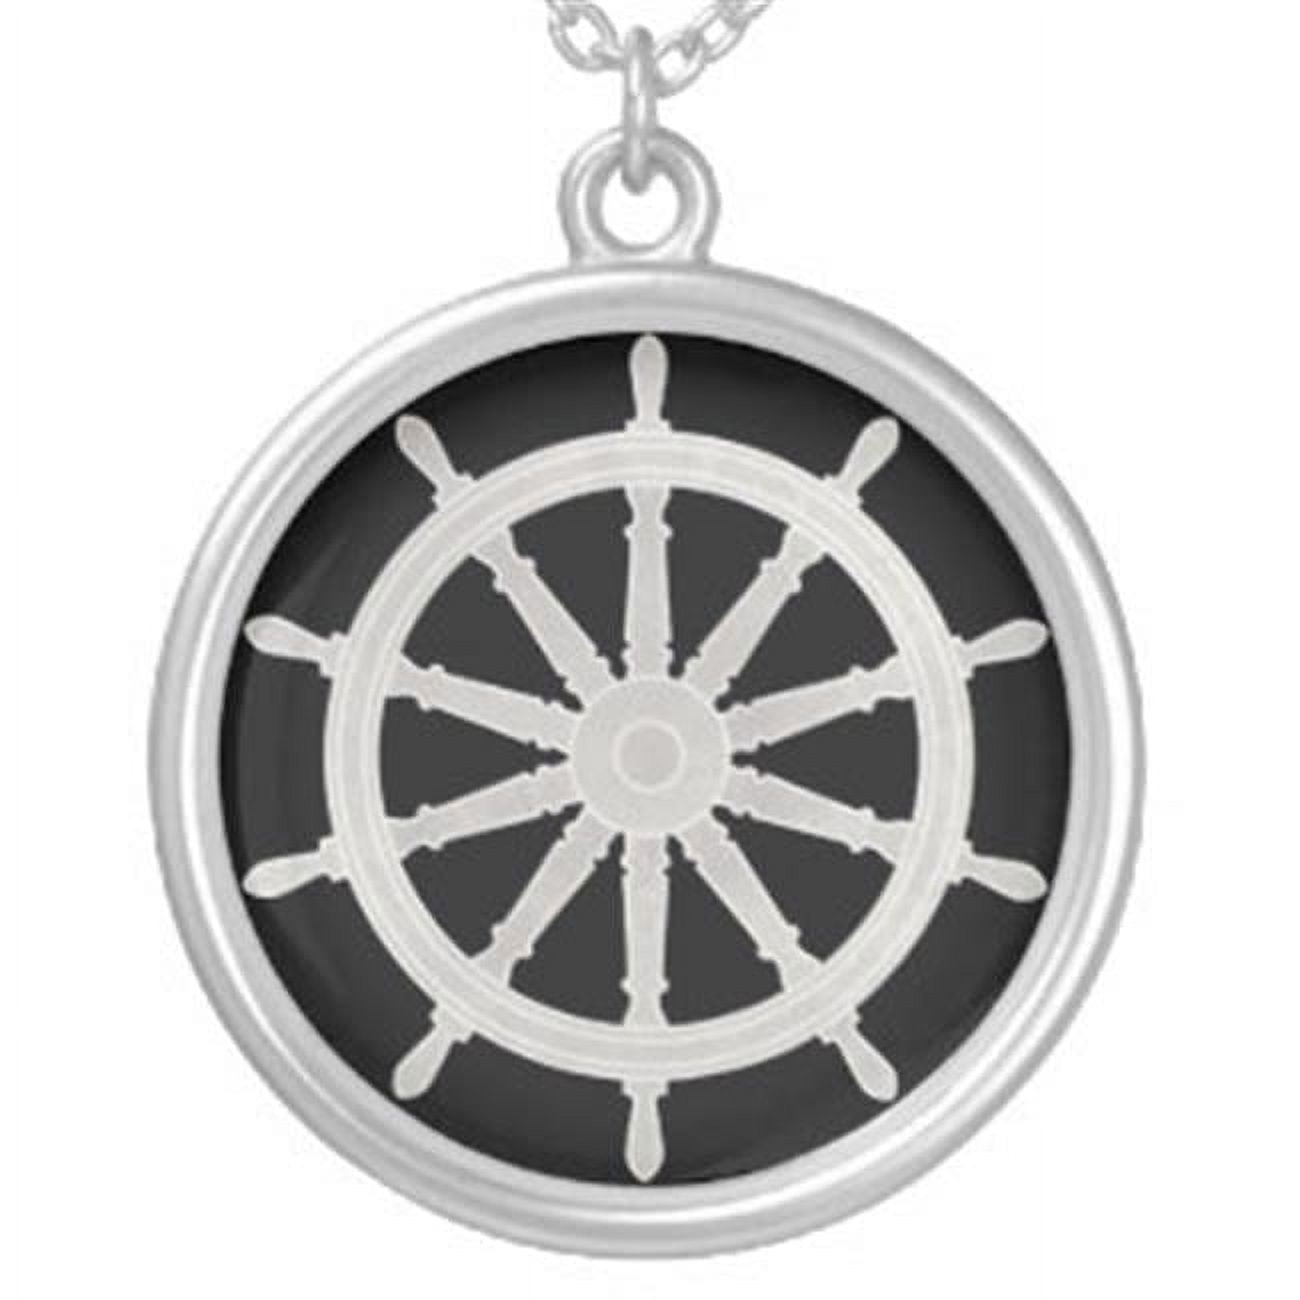 013295 1 X 1 In. Peel & Press Ships Wheel Icon, Silver Plated